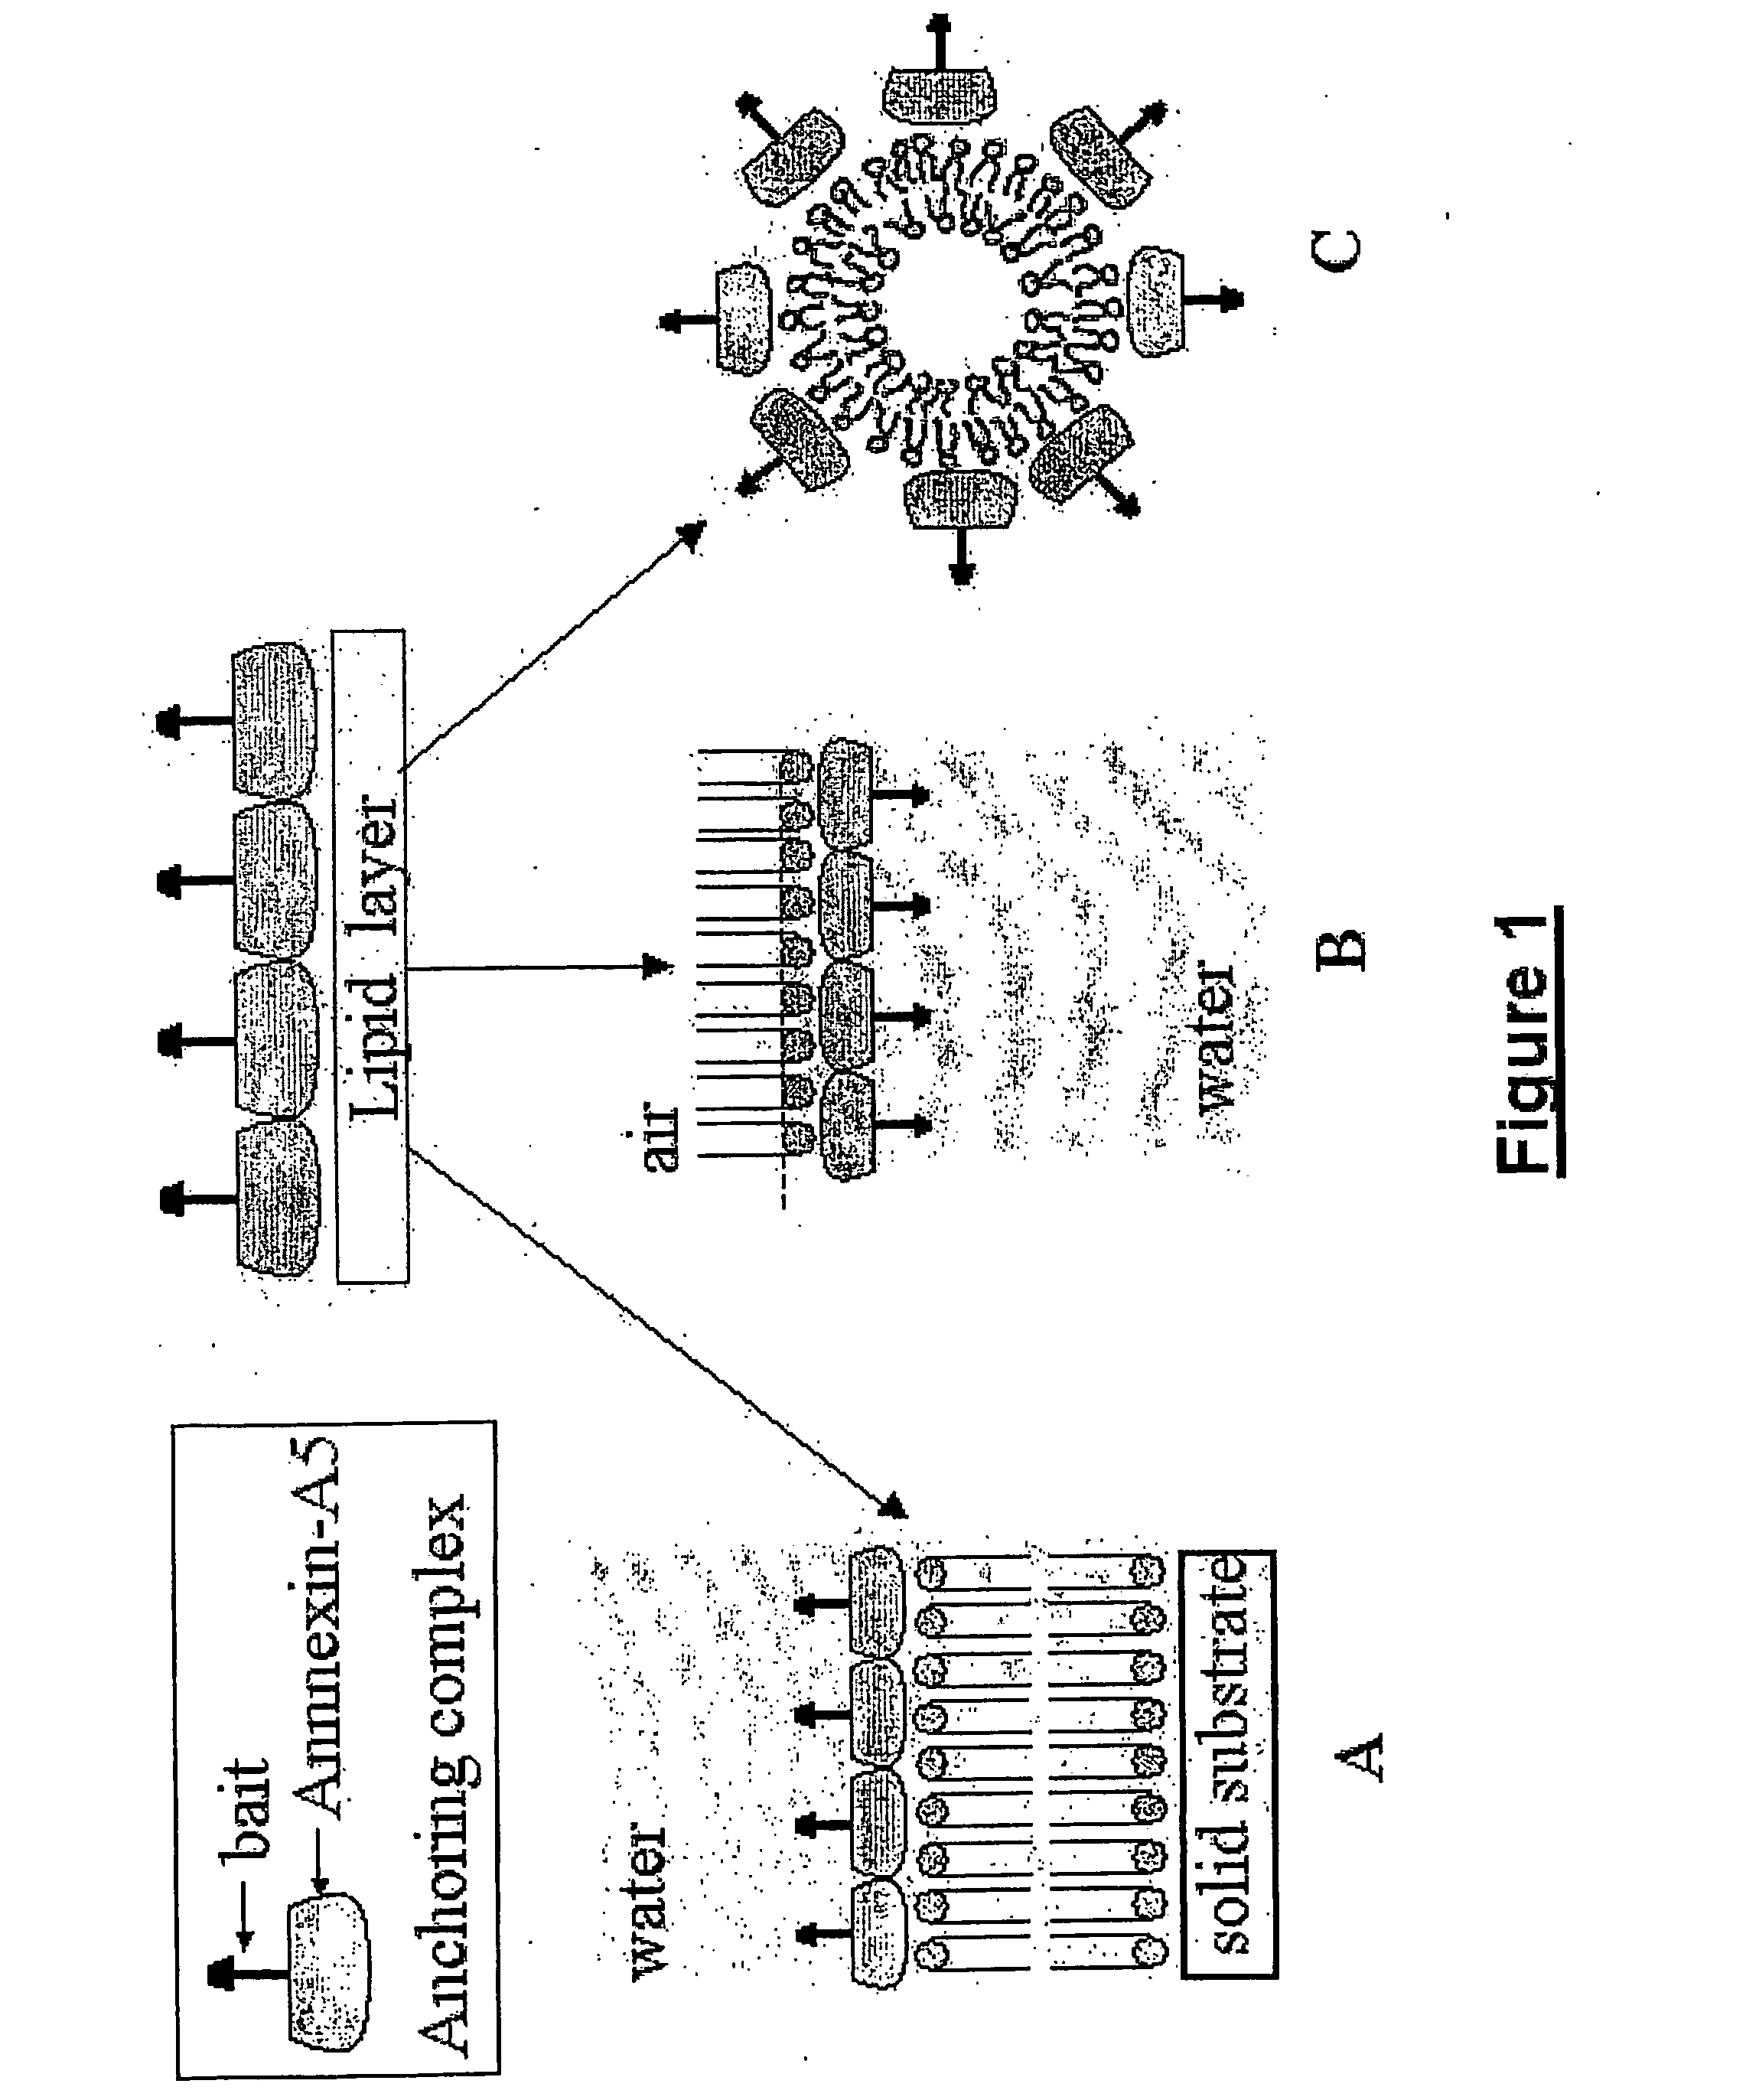 Device for binding a target entity to a bait entity and detection methods using the same